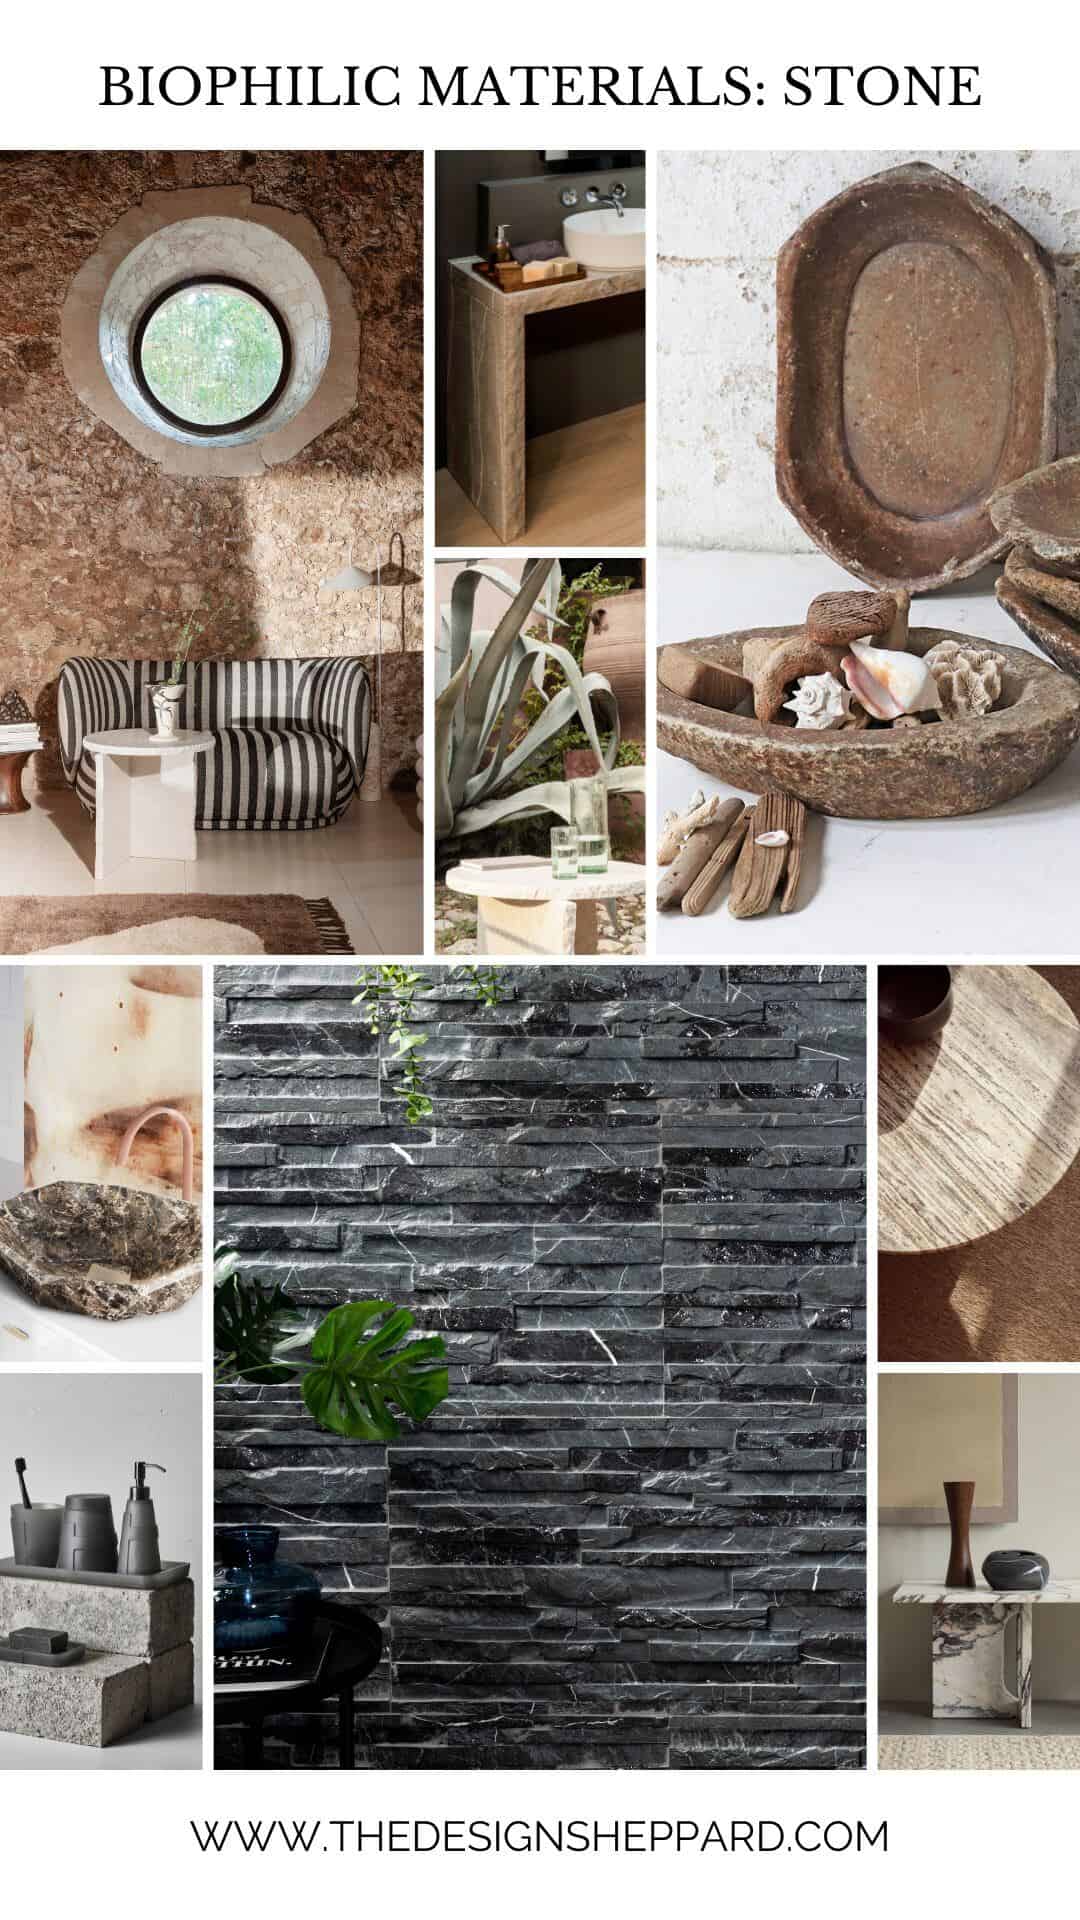 Stone is a biophilic design material